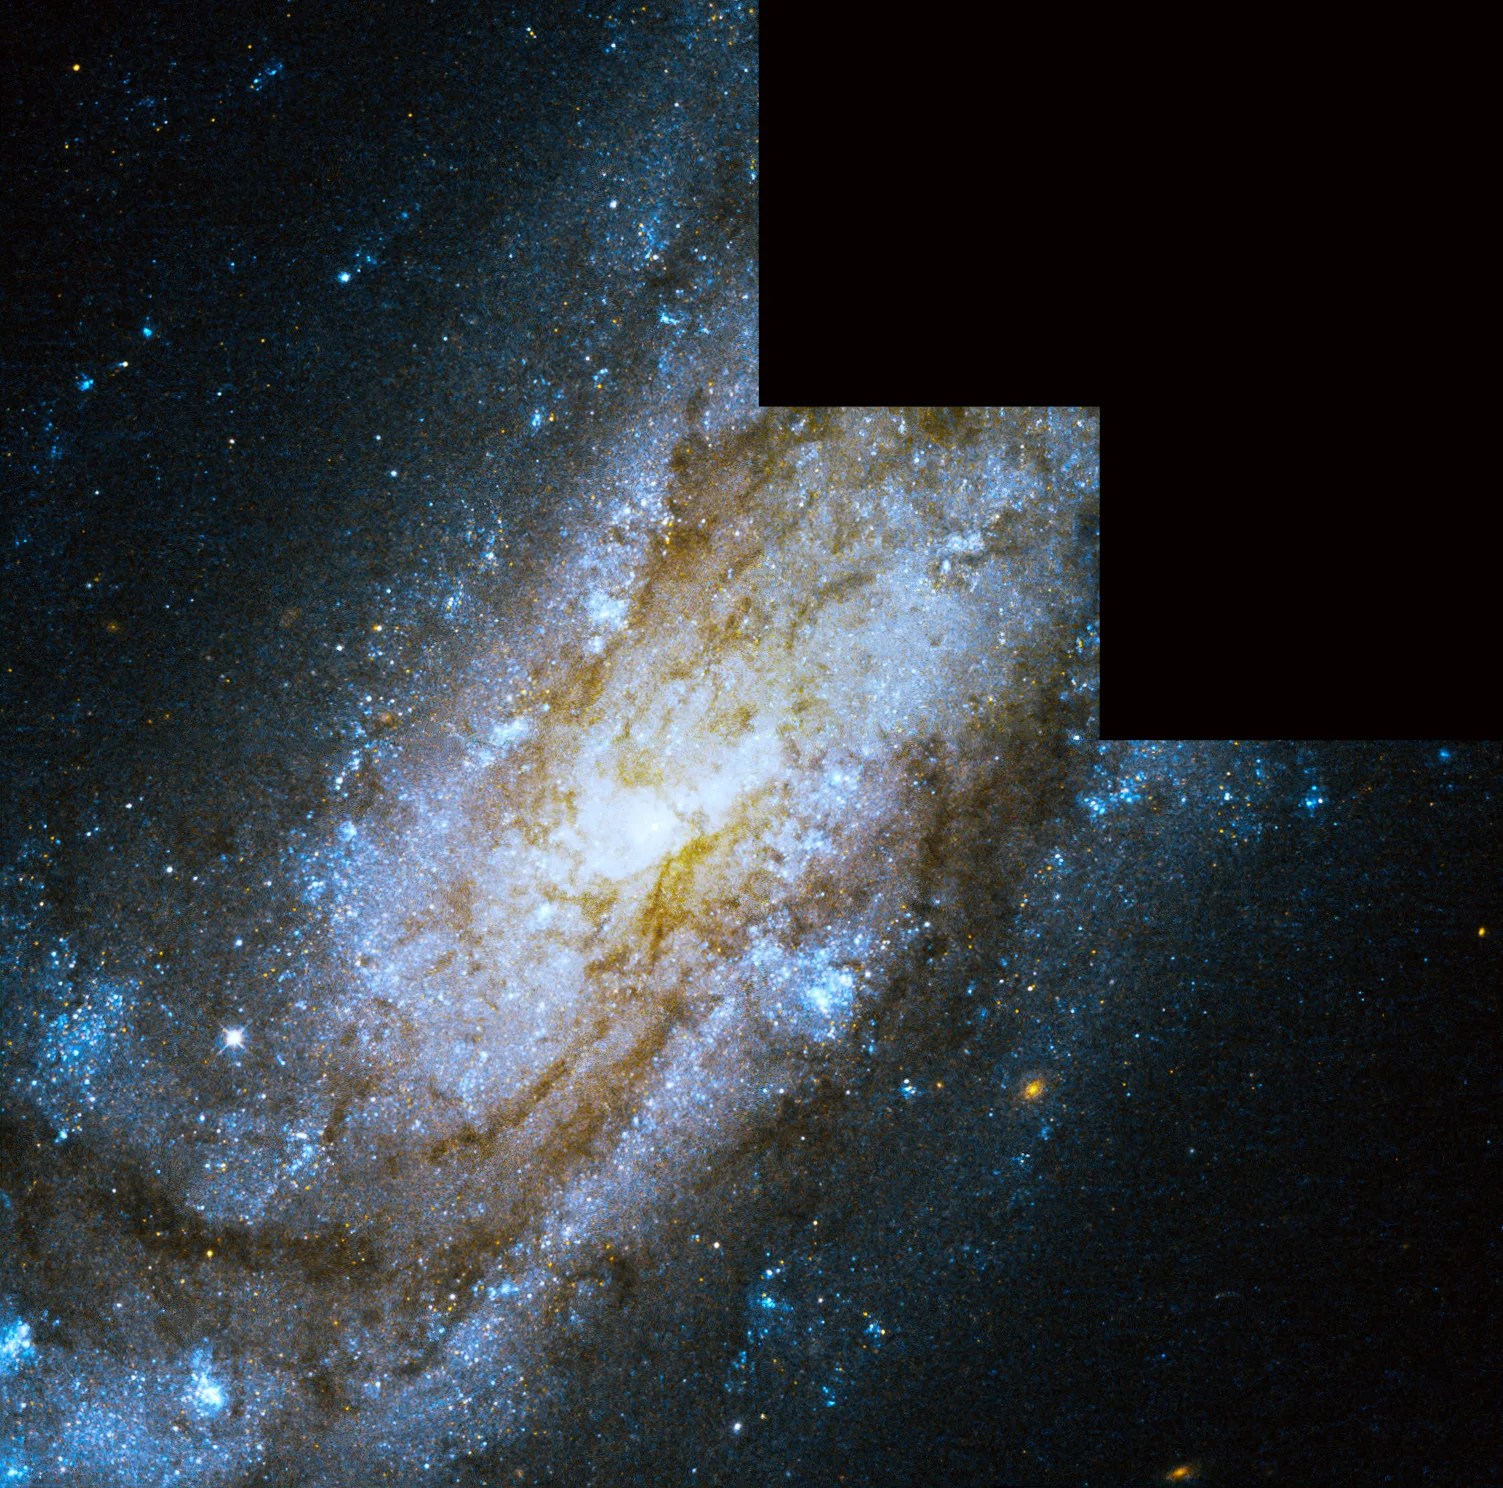 Large spiral galaxy, countless stars surround the bright center core of the galaxy in the middle of the image. The arms of the galaxy are dusty red clouds of gas enmeshed by blue stars throughout.